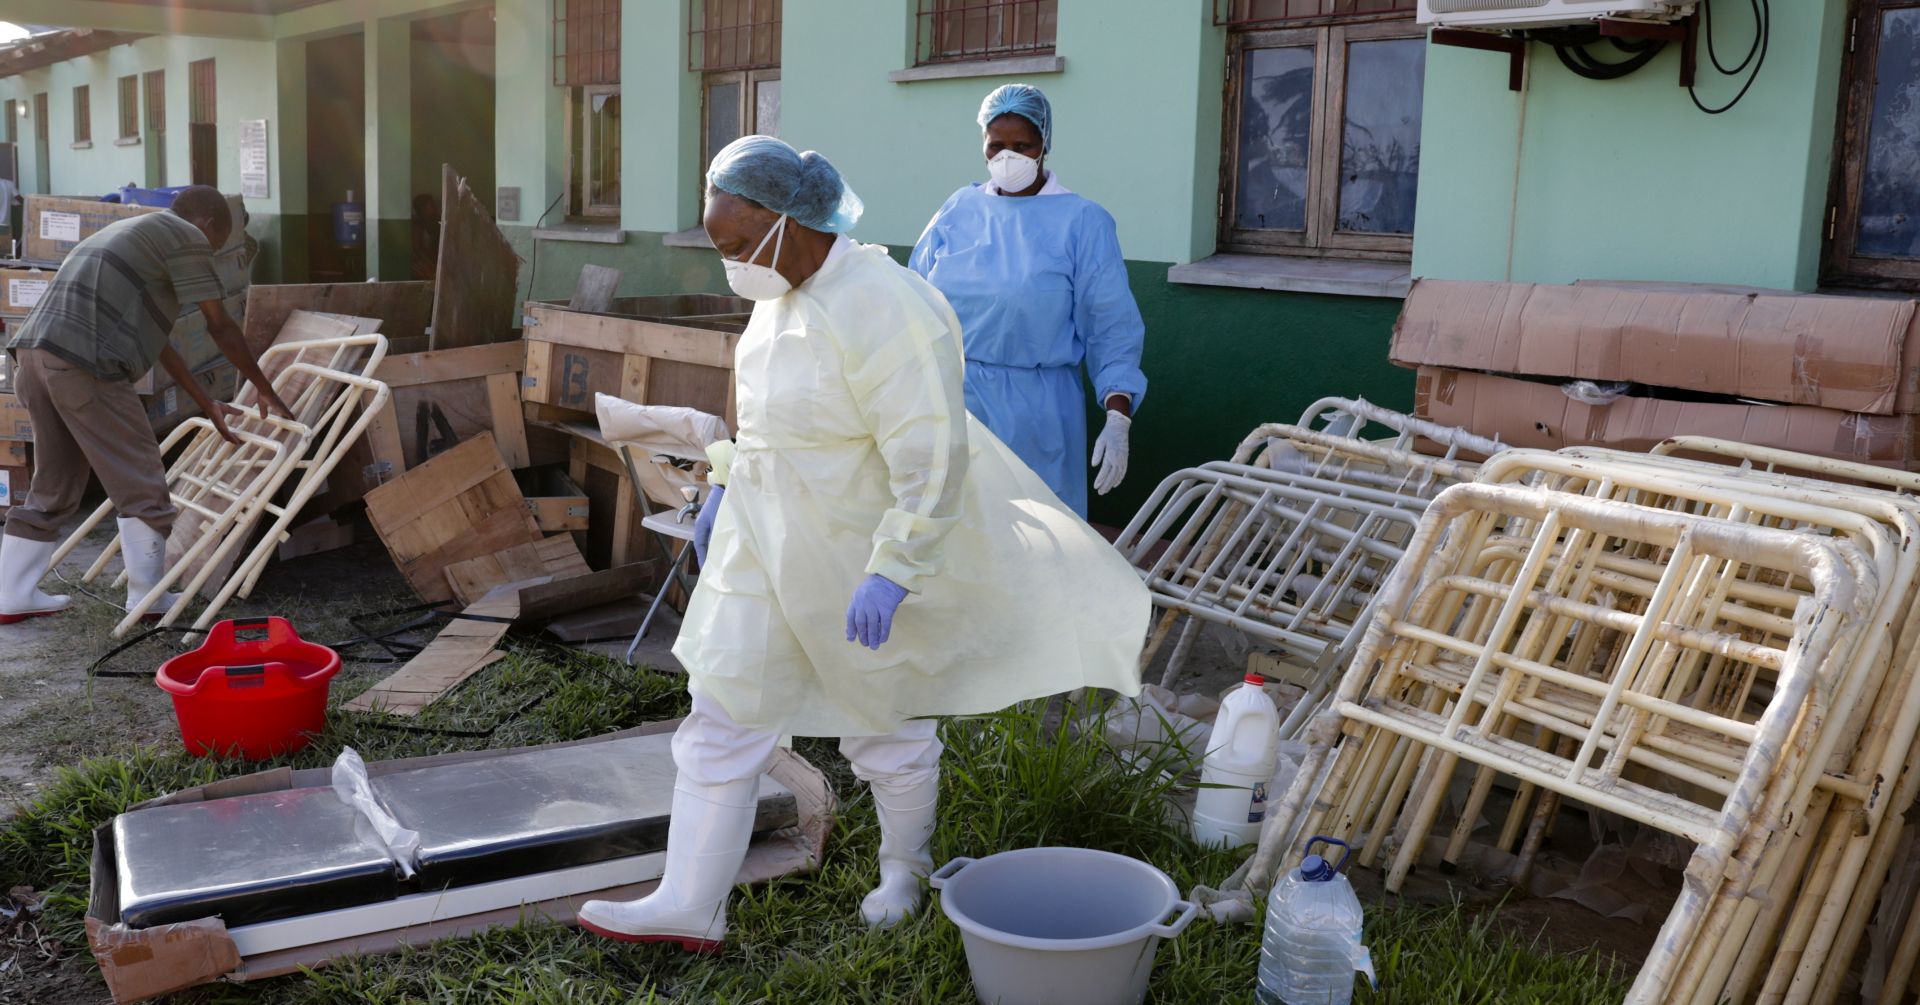 epa07469453 Mozambican doctors and nurses cleane and prepare beds in the newly opened Unicef center of Cholera treatment in the Macurungo neighbourhood of the city of Beira, after the passage of cyclone Idai, in the province of Sofala, central Mozambique, 28 March 2019. Reports state that some 1.7 million people are said to be affected across southern Africa.  EPA/TIAGO PETINGA